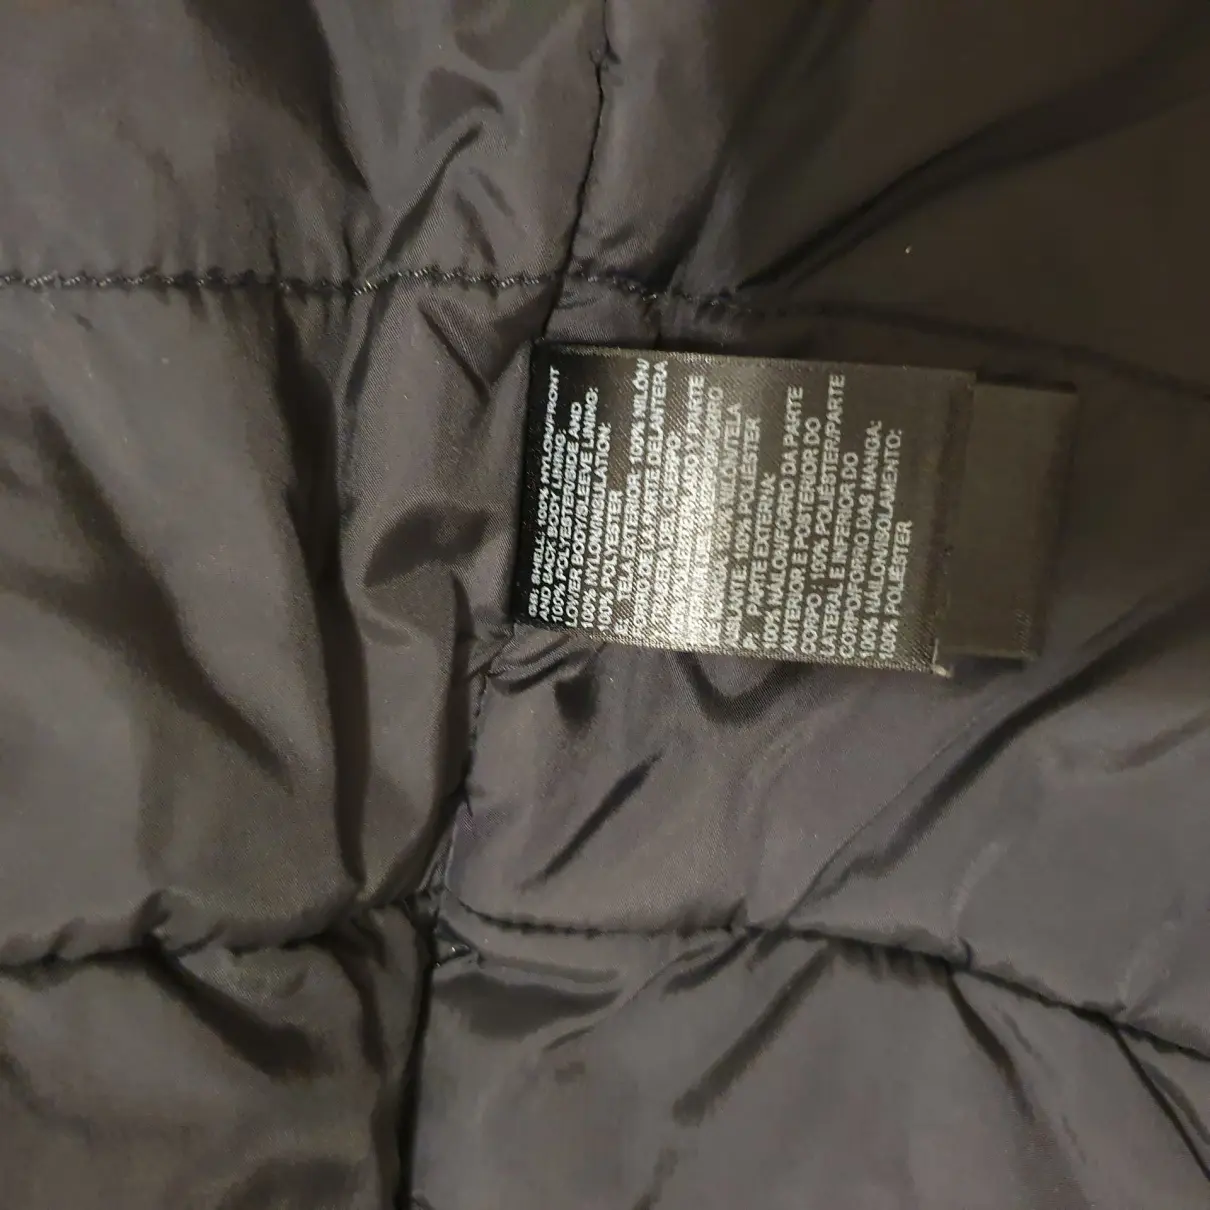 Buy The North Face Jacket online